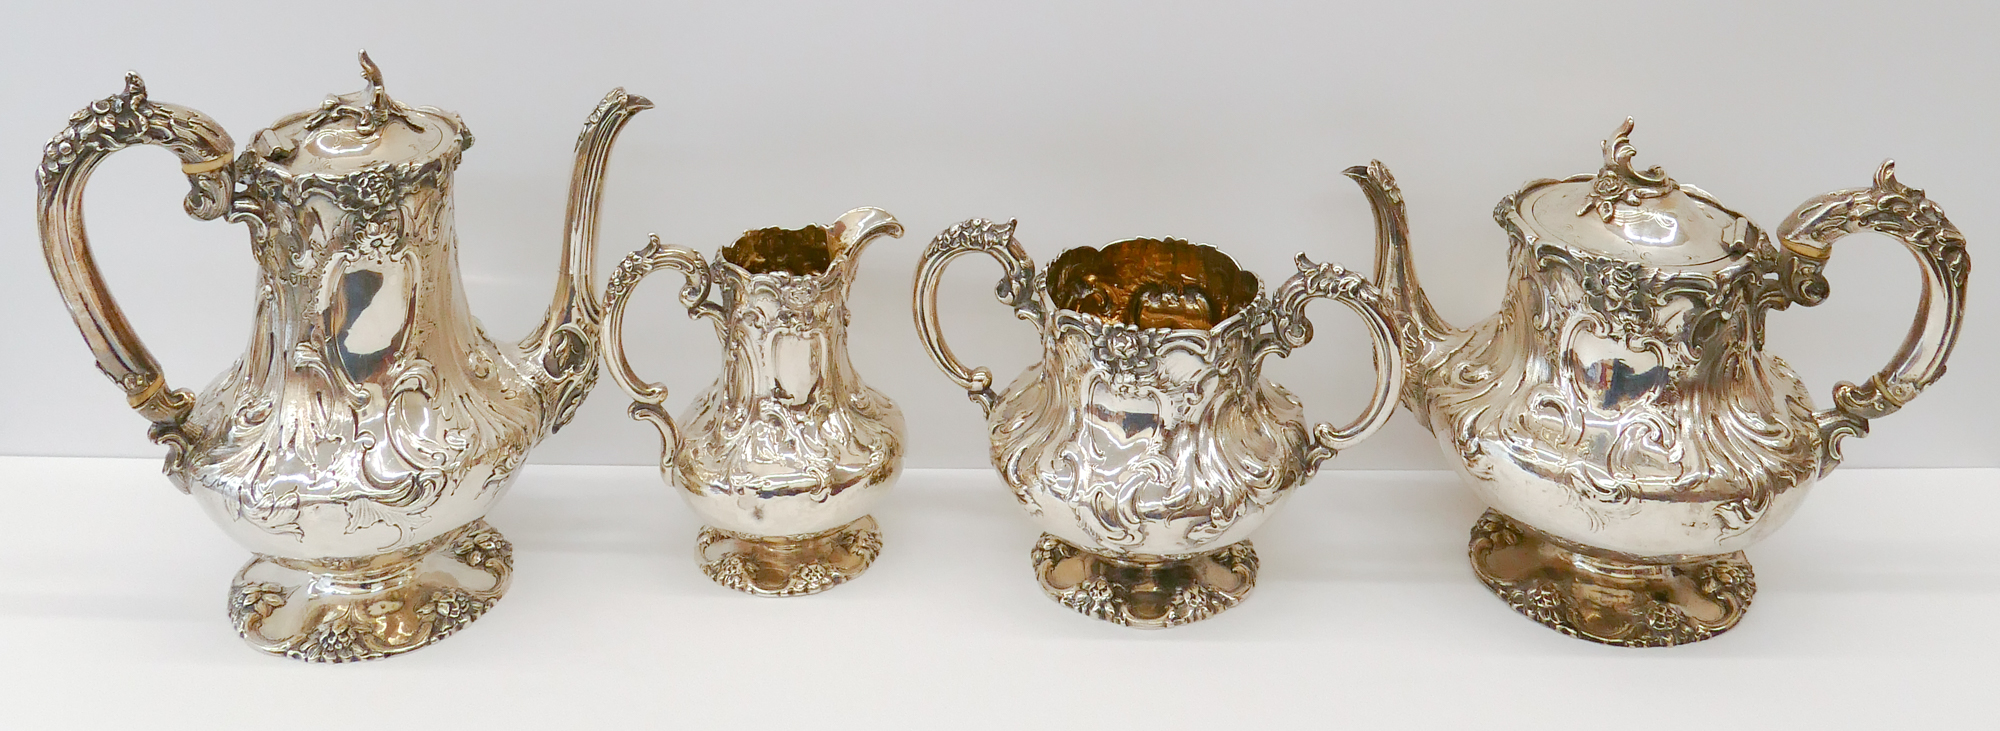 4pc Victorian English Sterling